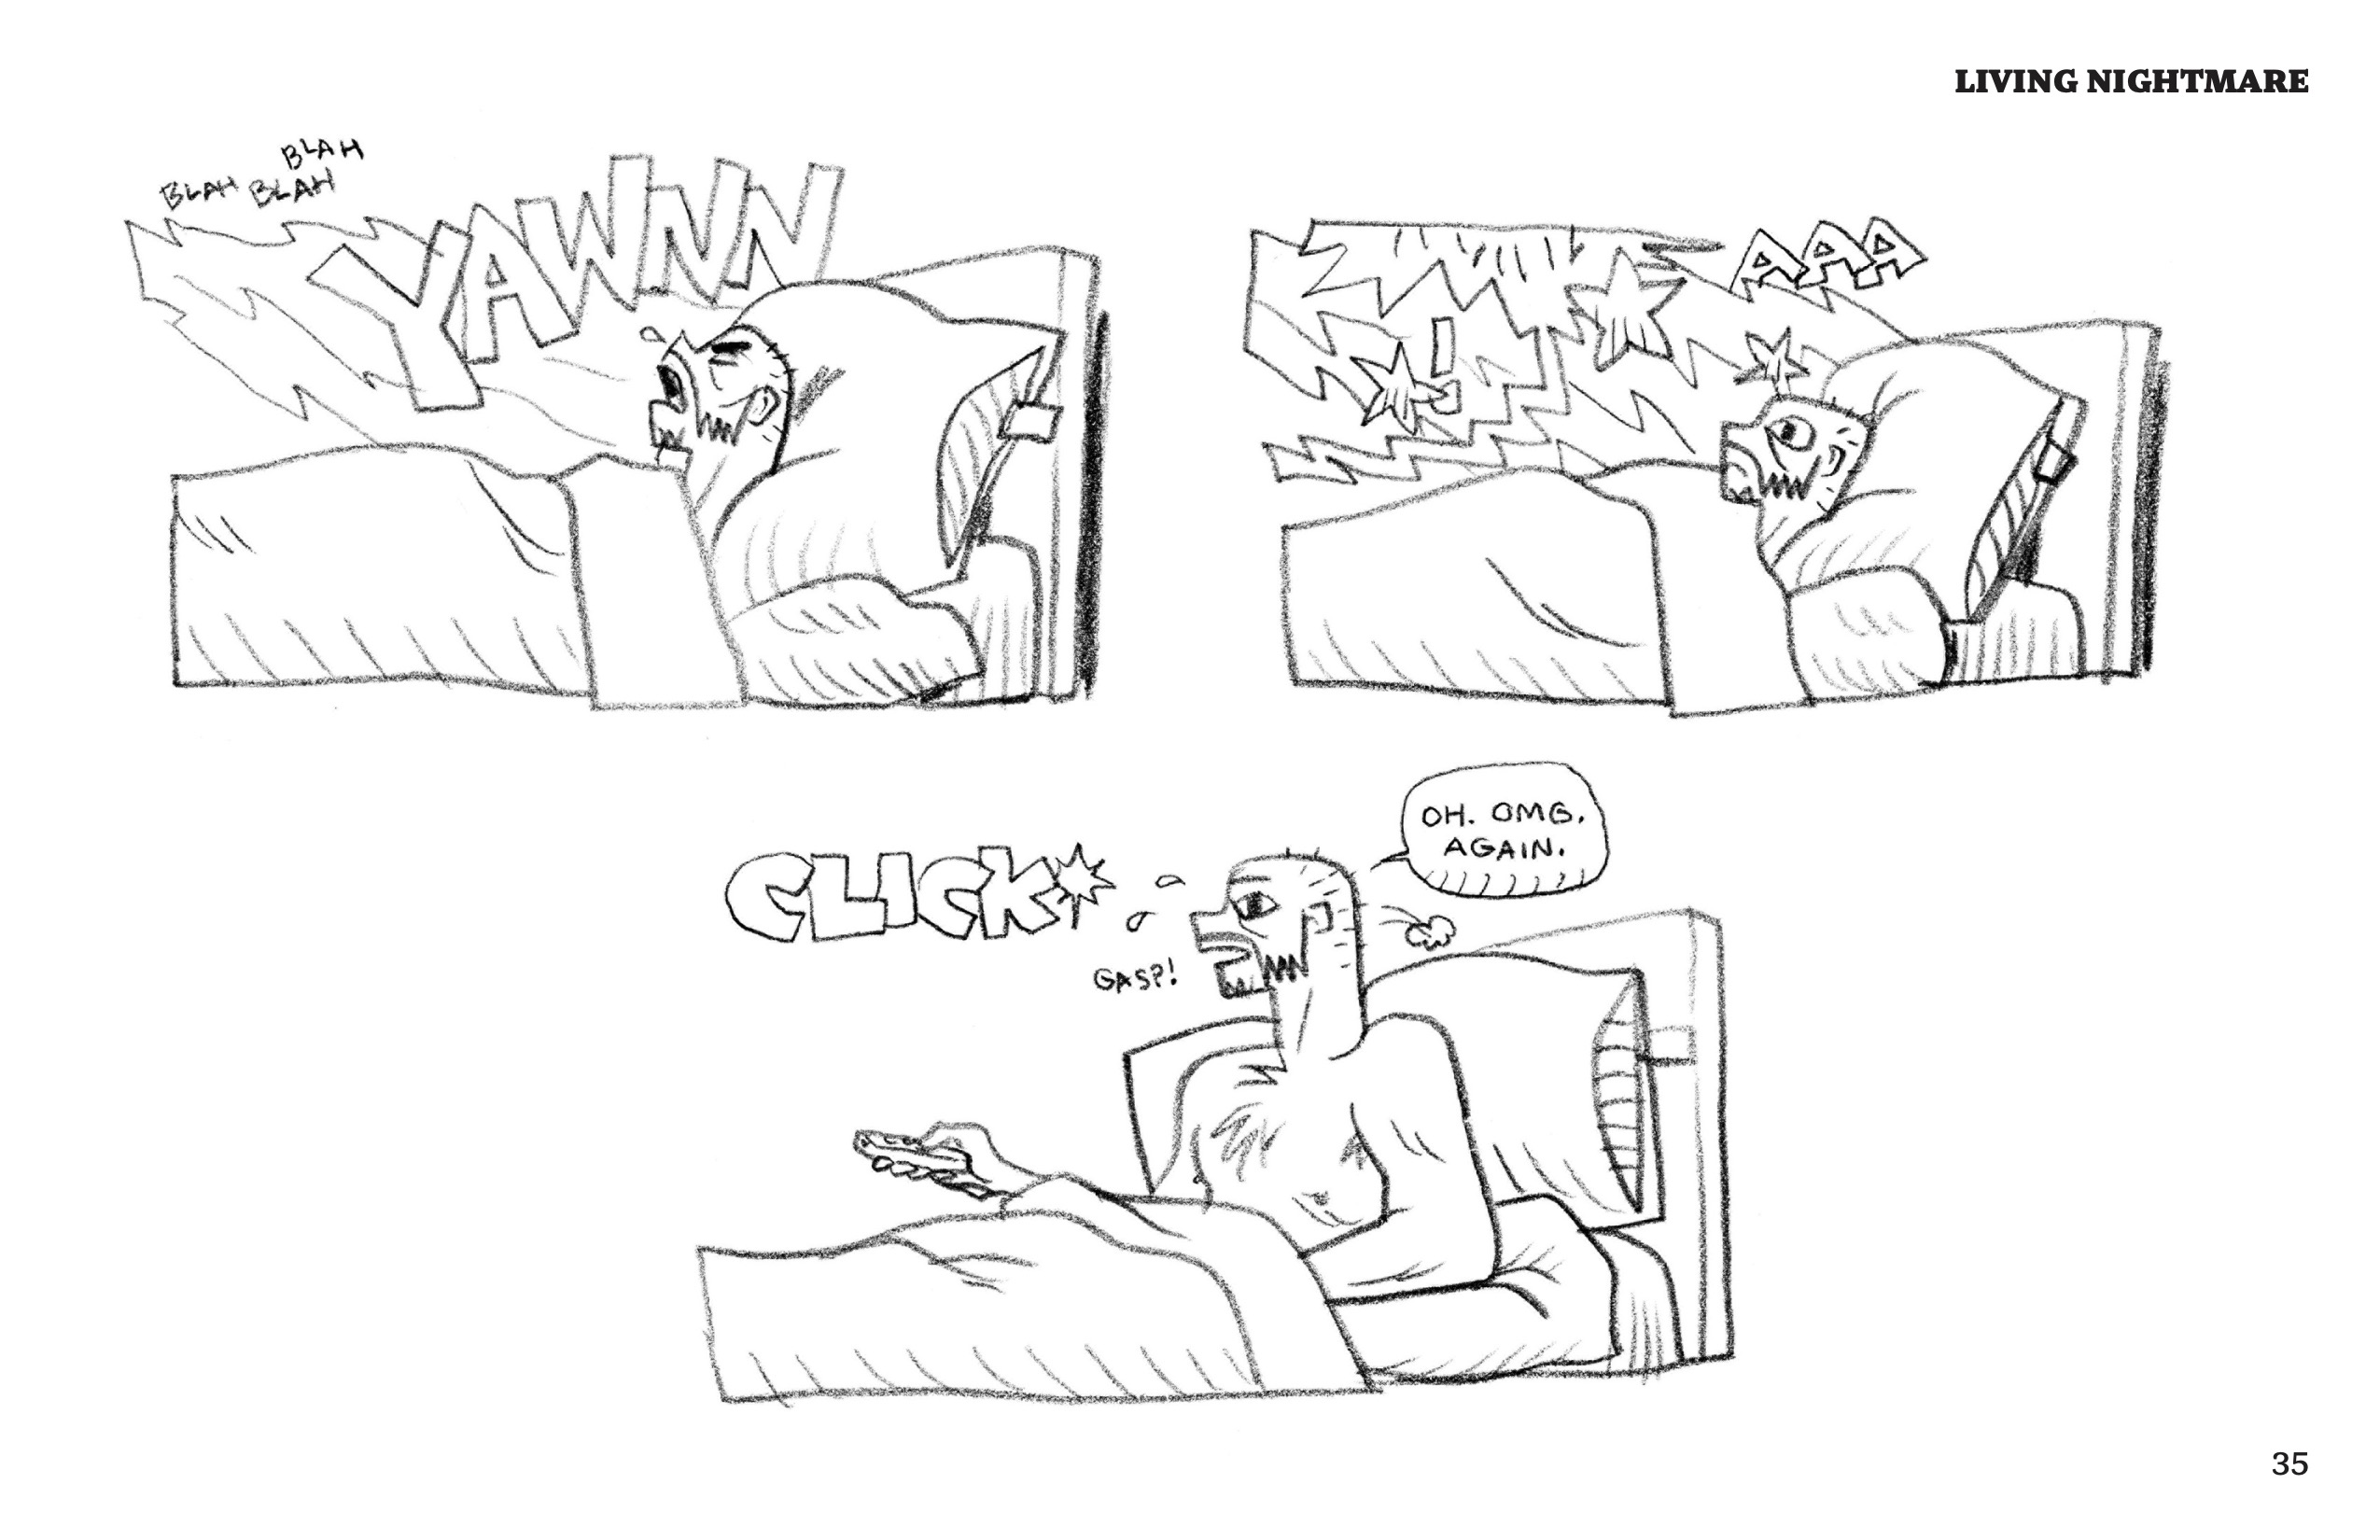 1. Derek is tucked in bed, lying down with head on his pillow and blankets pulled up to his neck. He yawns loudly (drawn in block letters). A light is shining on him and chatter comes from off panel, "Blah blah blah."

2. Derek is in the same position as before, but his eyes are wide open and he is frowning. The light is still shining on him, but now it is overlapped by stars and a scream in block letters, "AAAA."

3. Derek sits up in bed looking distressed. He is shirtless, with hair on his chest. Mouth agape, he gasps. He clicks his remote and the light stops shining. He says, "Oh. OMG. Again."